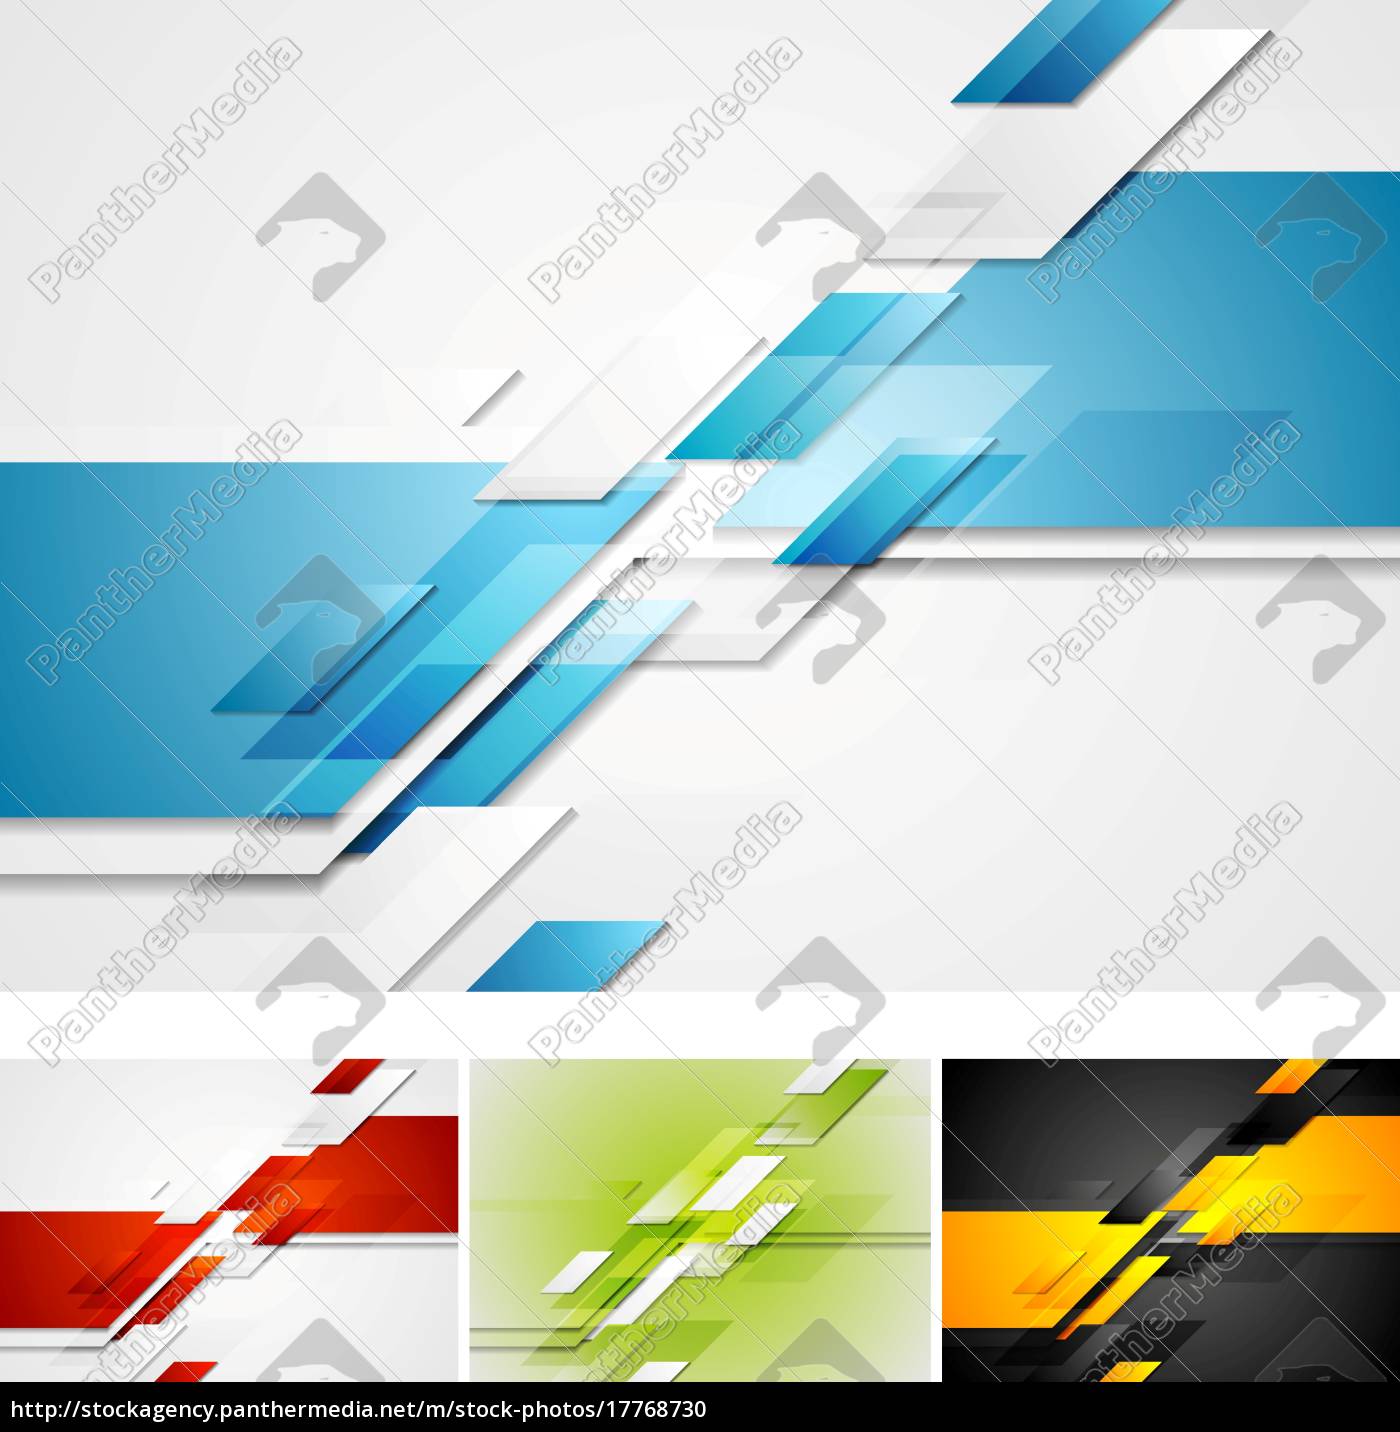 Abstract Bright Corporate Tech Background Royalty Free Image